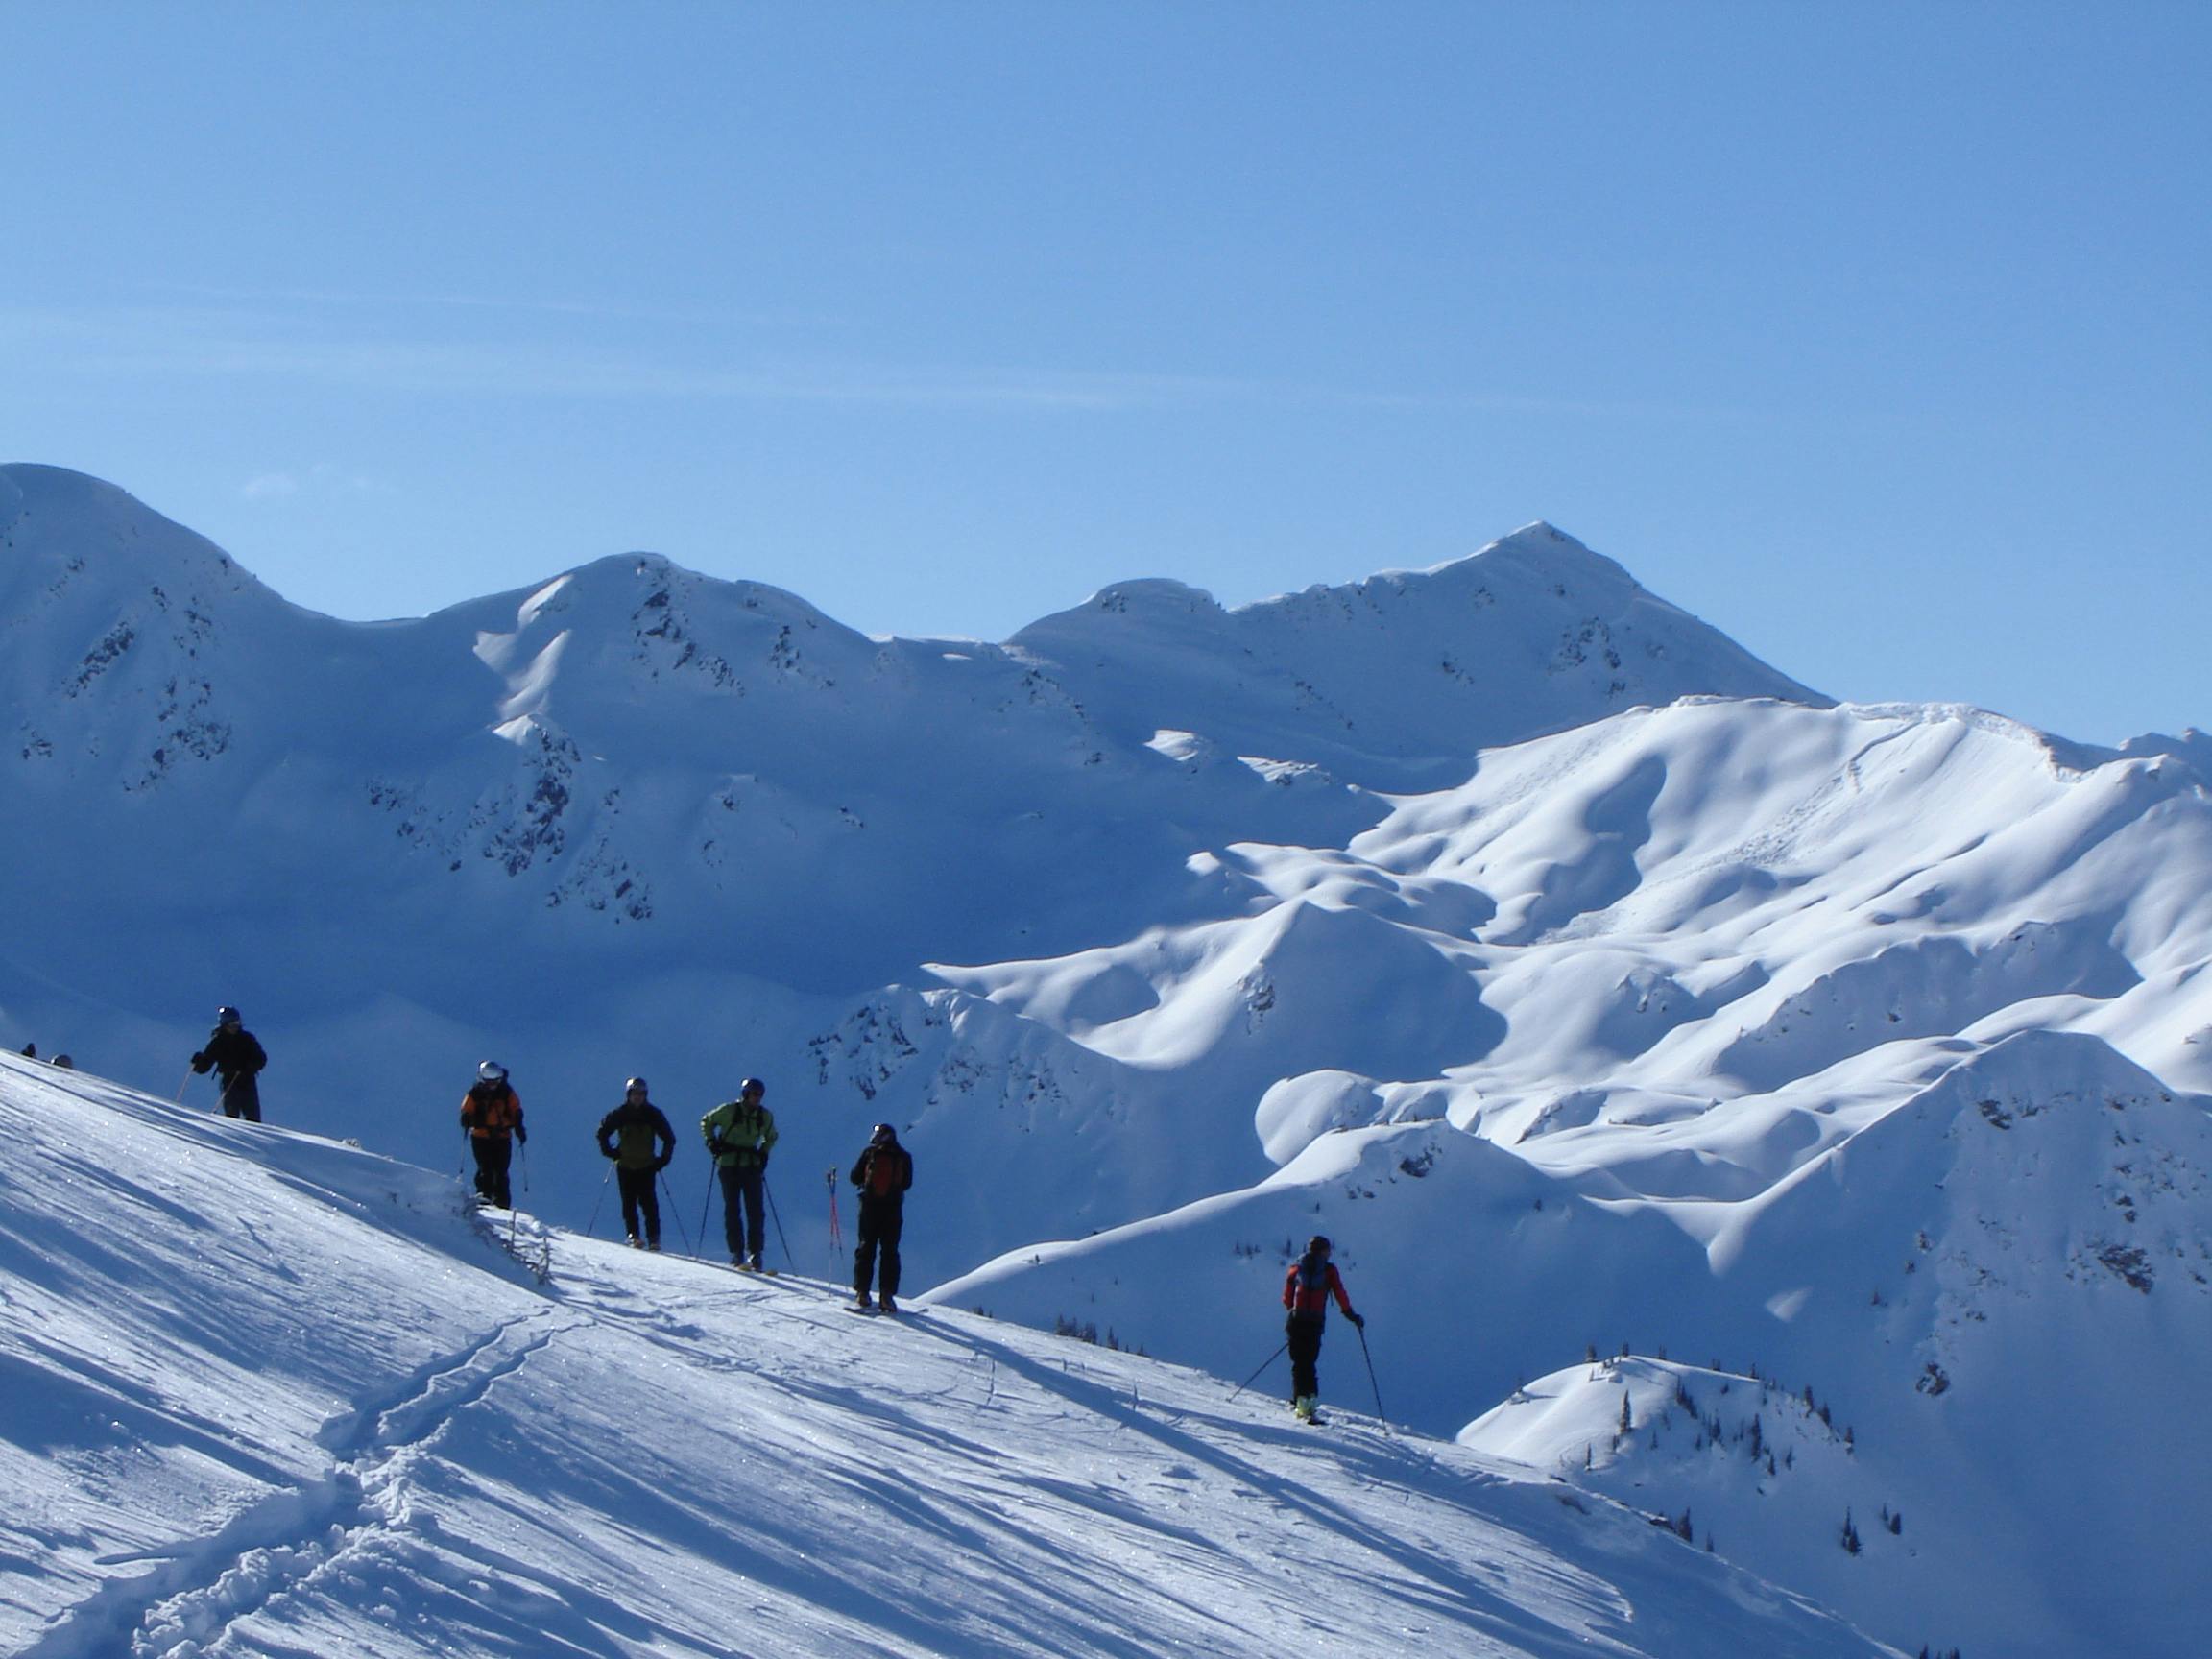 A group of stand on an alpine ridge looking at the terrain below them. Photo by Mark Bender